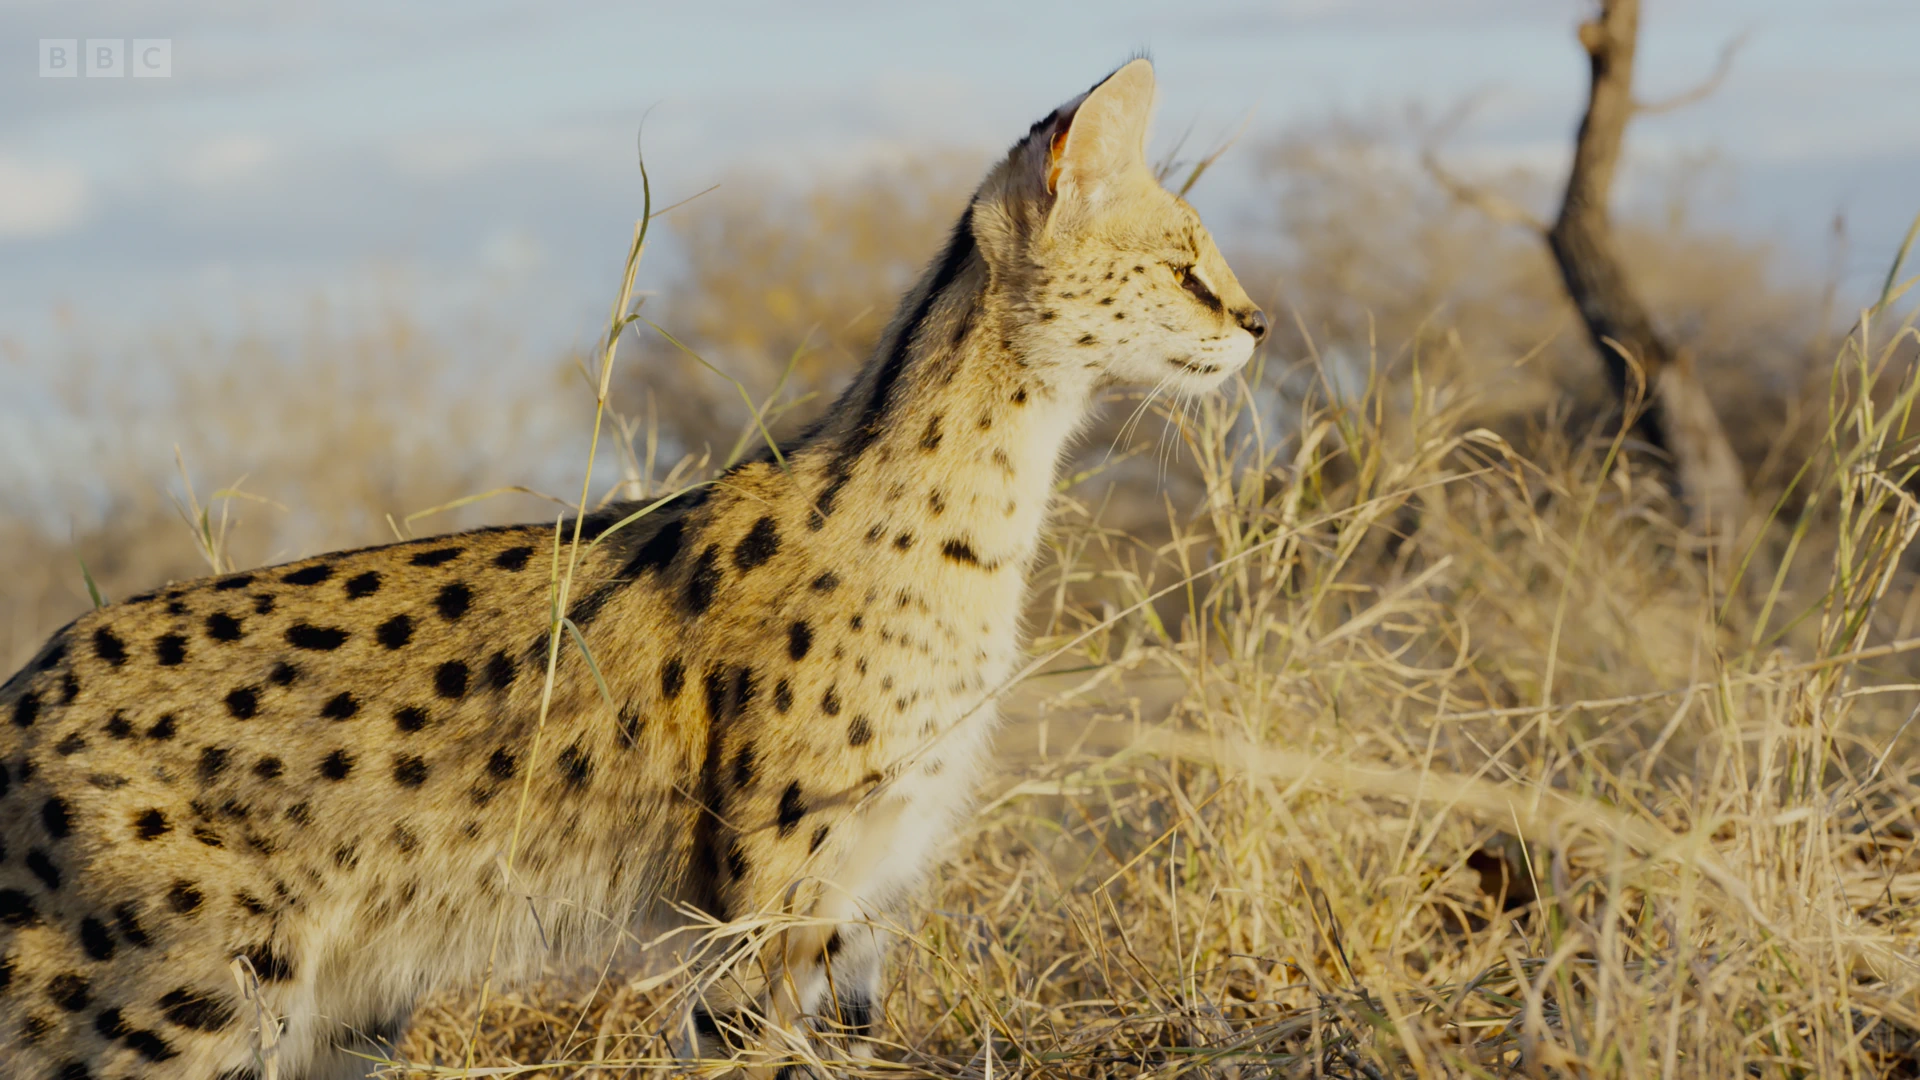 Southern serval (Leptailurus serval serval) as shown in Planet Earth II - Grasslands